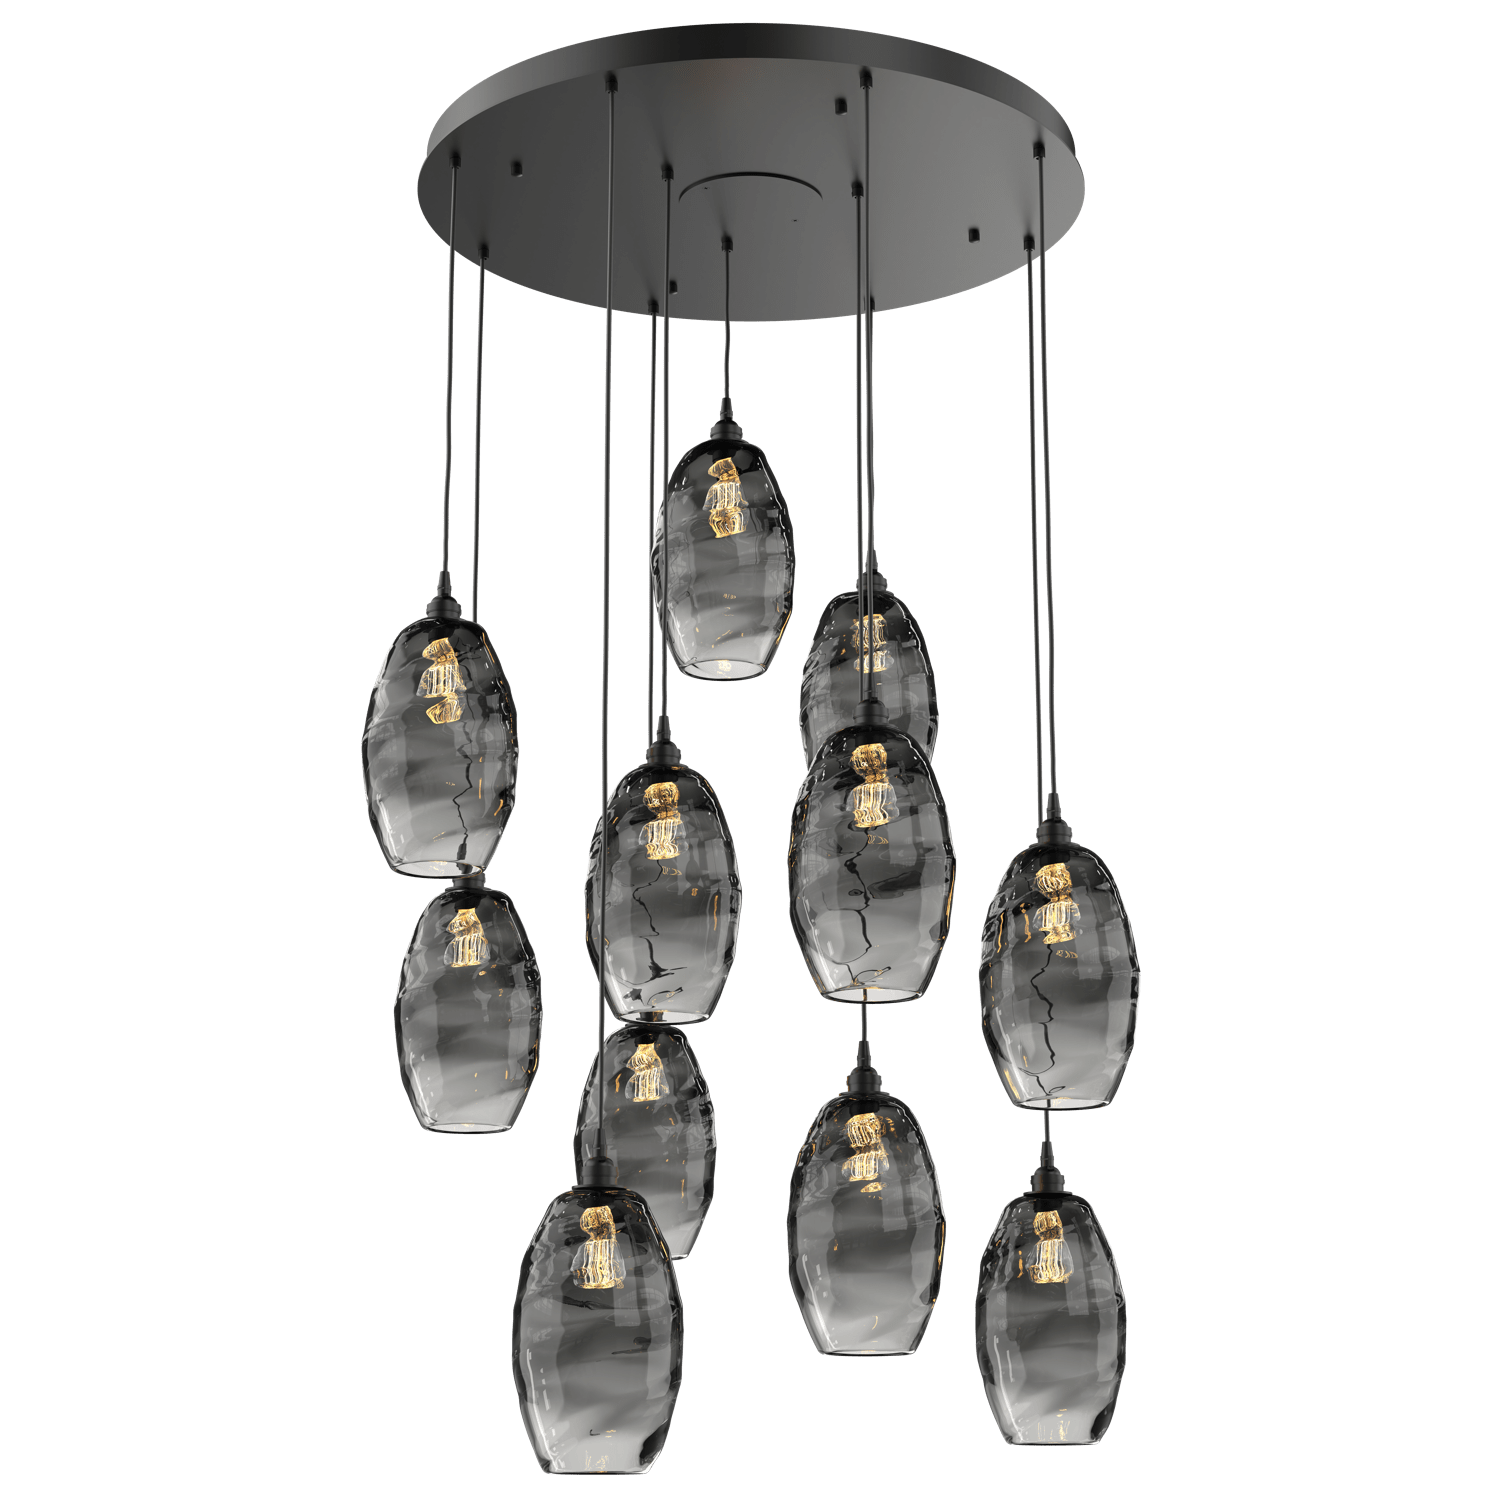 CHB0035-11-MB-OS-Hammerton-Studio-Optic-Blown-Glass-Elisse-11-light-round-pendant-chandelier-with-matte-black-finish-and-optic-smoke-blown-glass-shades-and-incandescent-lamping